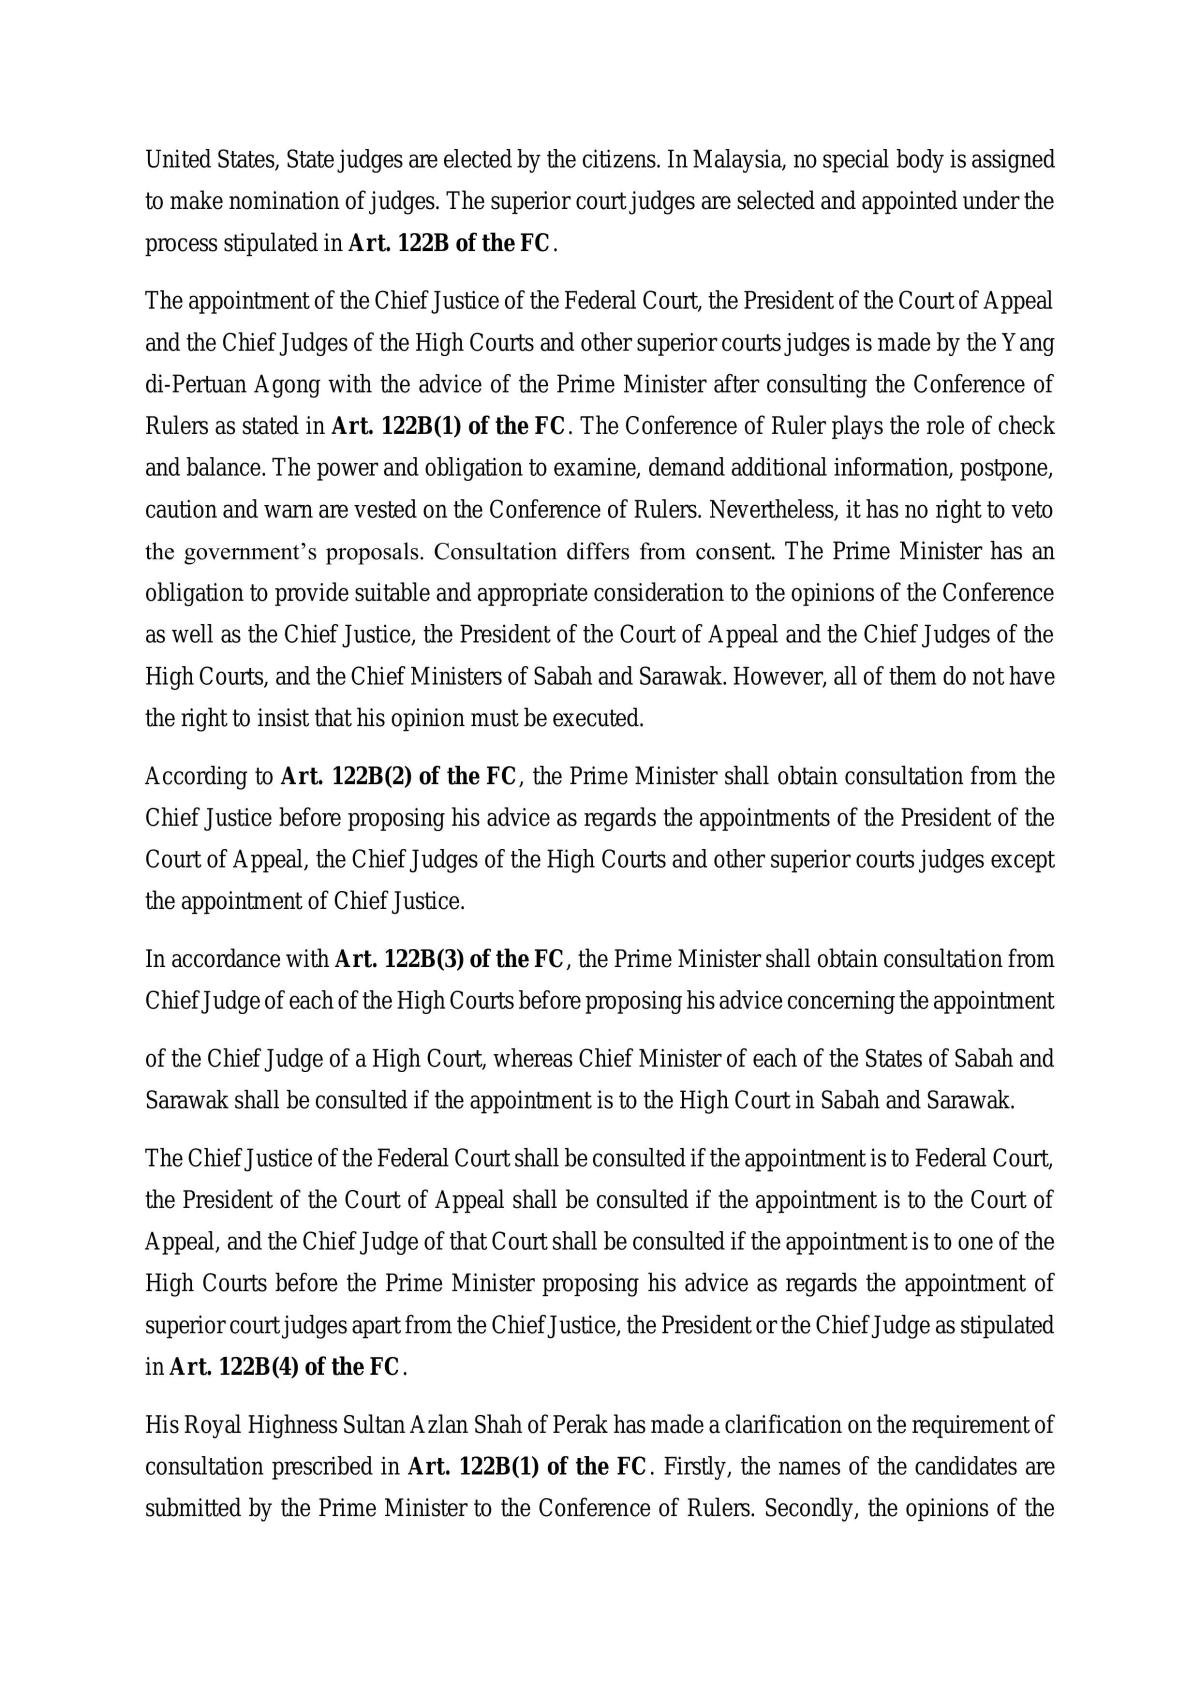 Qualification and Appointment of Judges - Page 2